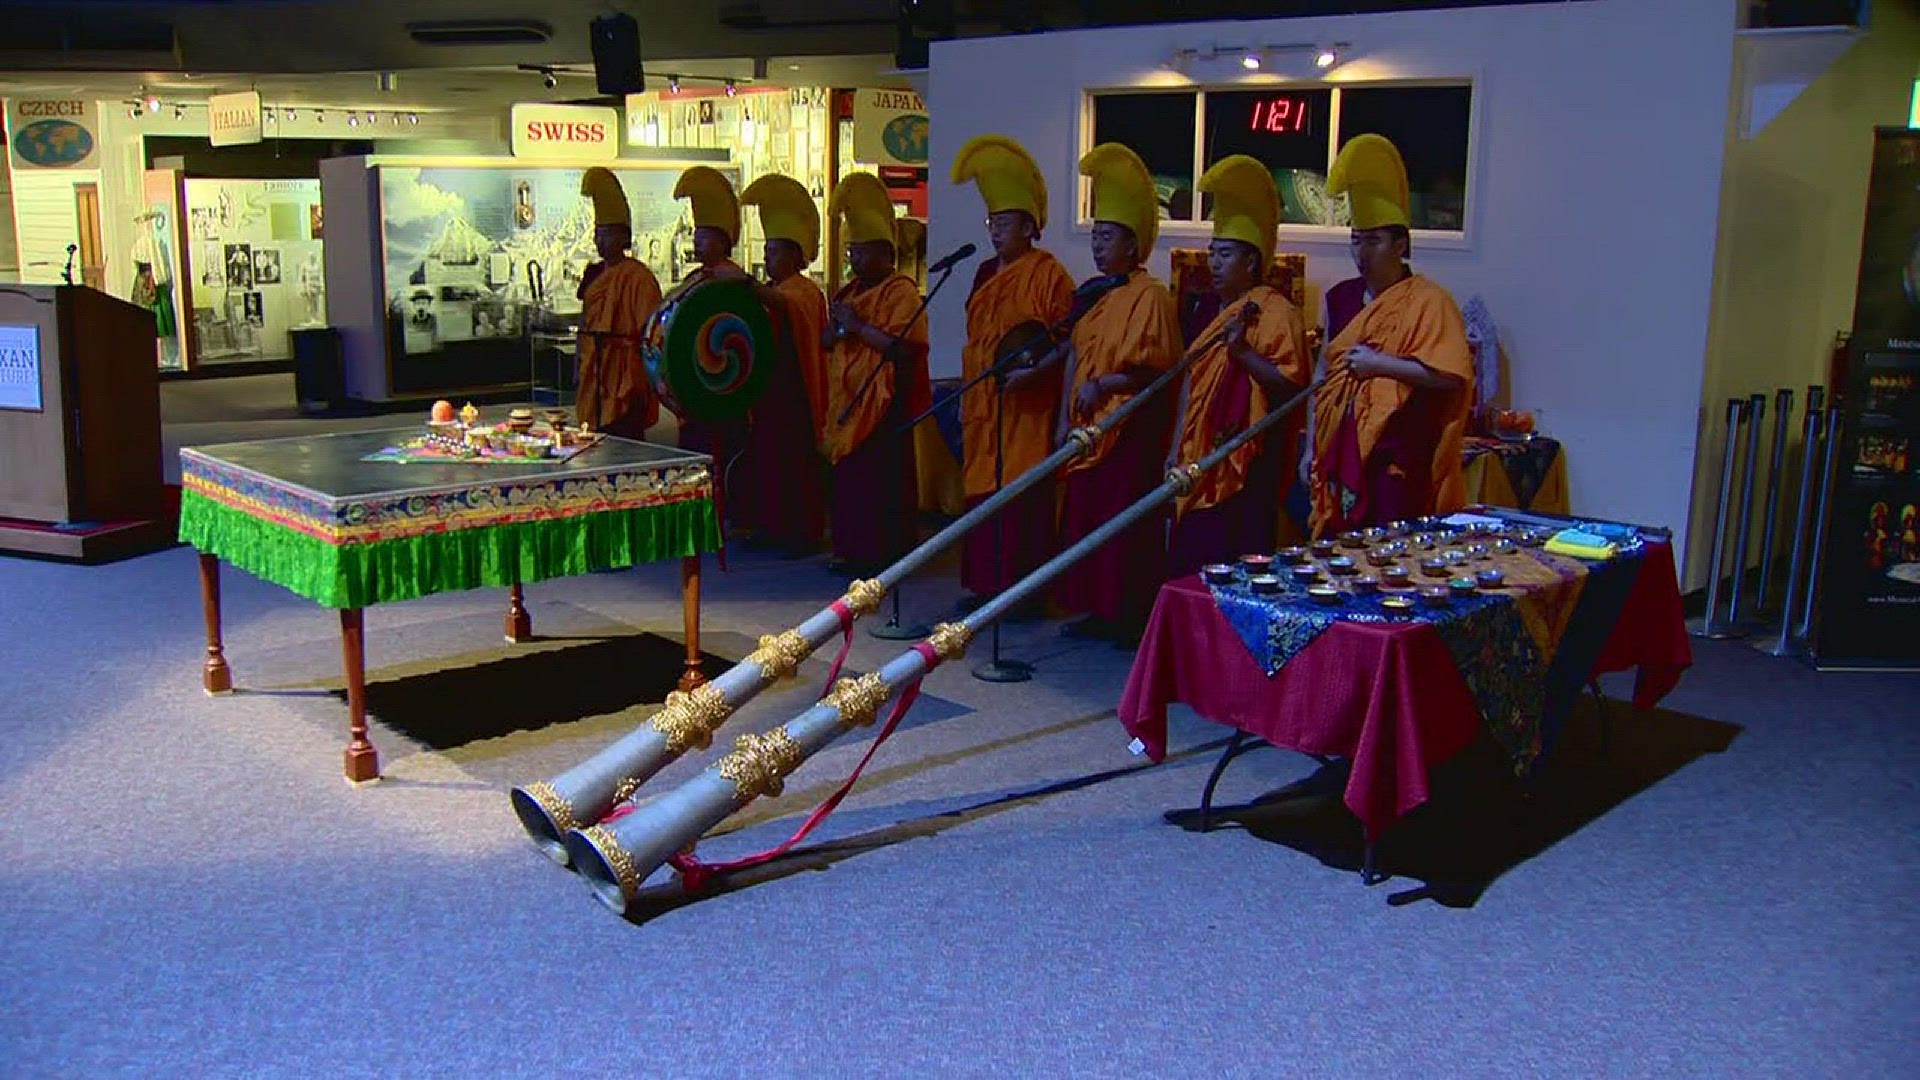 The Mystical Arts of Tibet tour is now at the UTSA Institute of Texan Cultures.